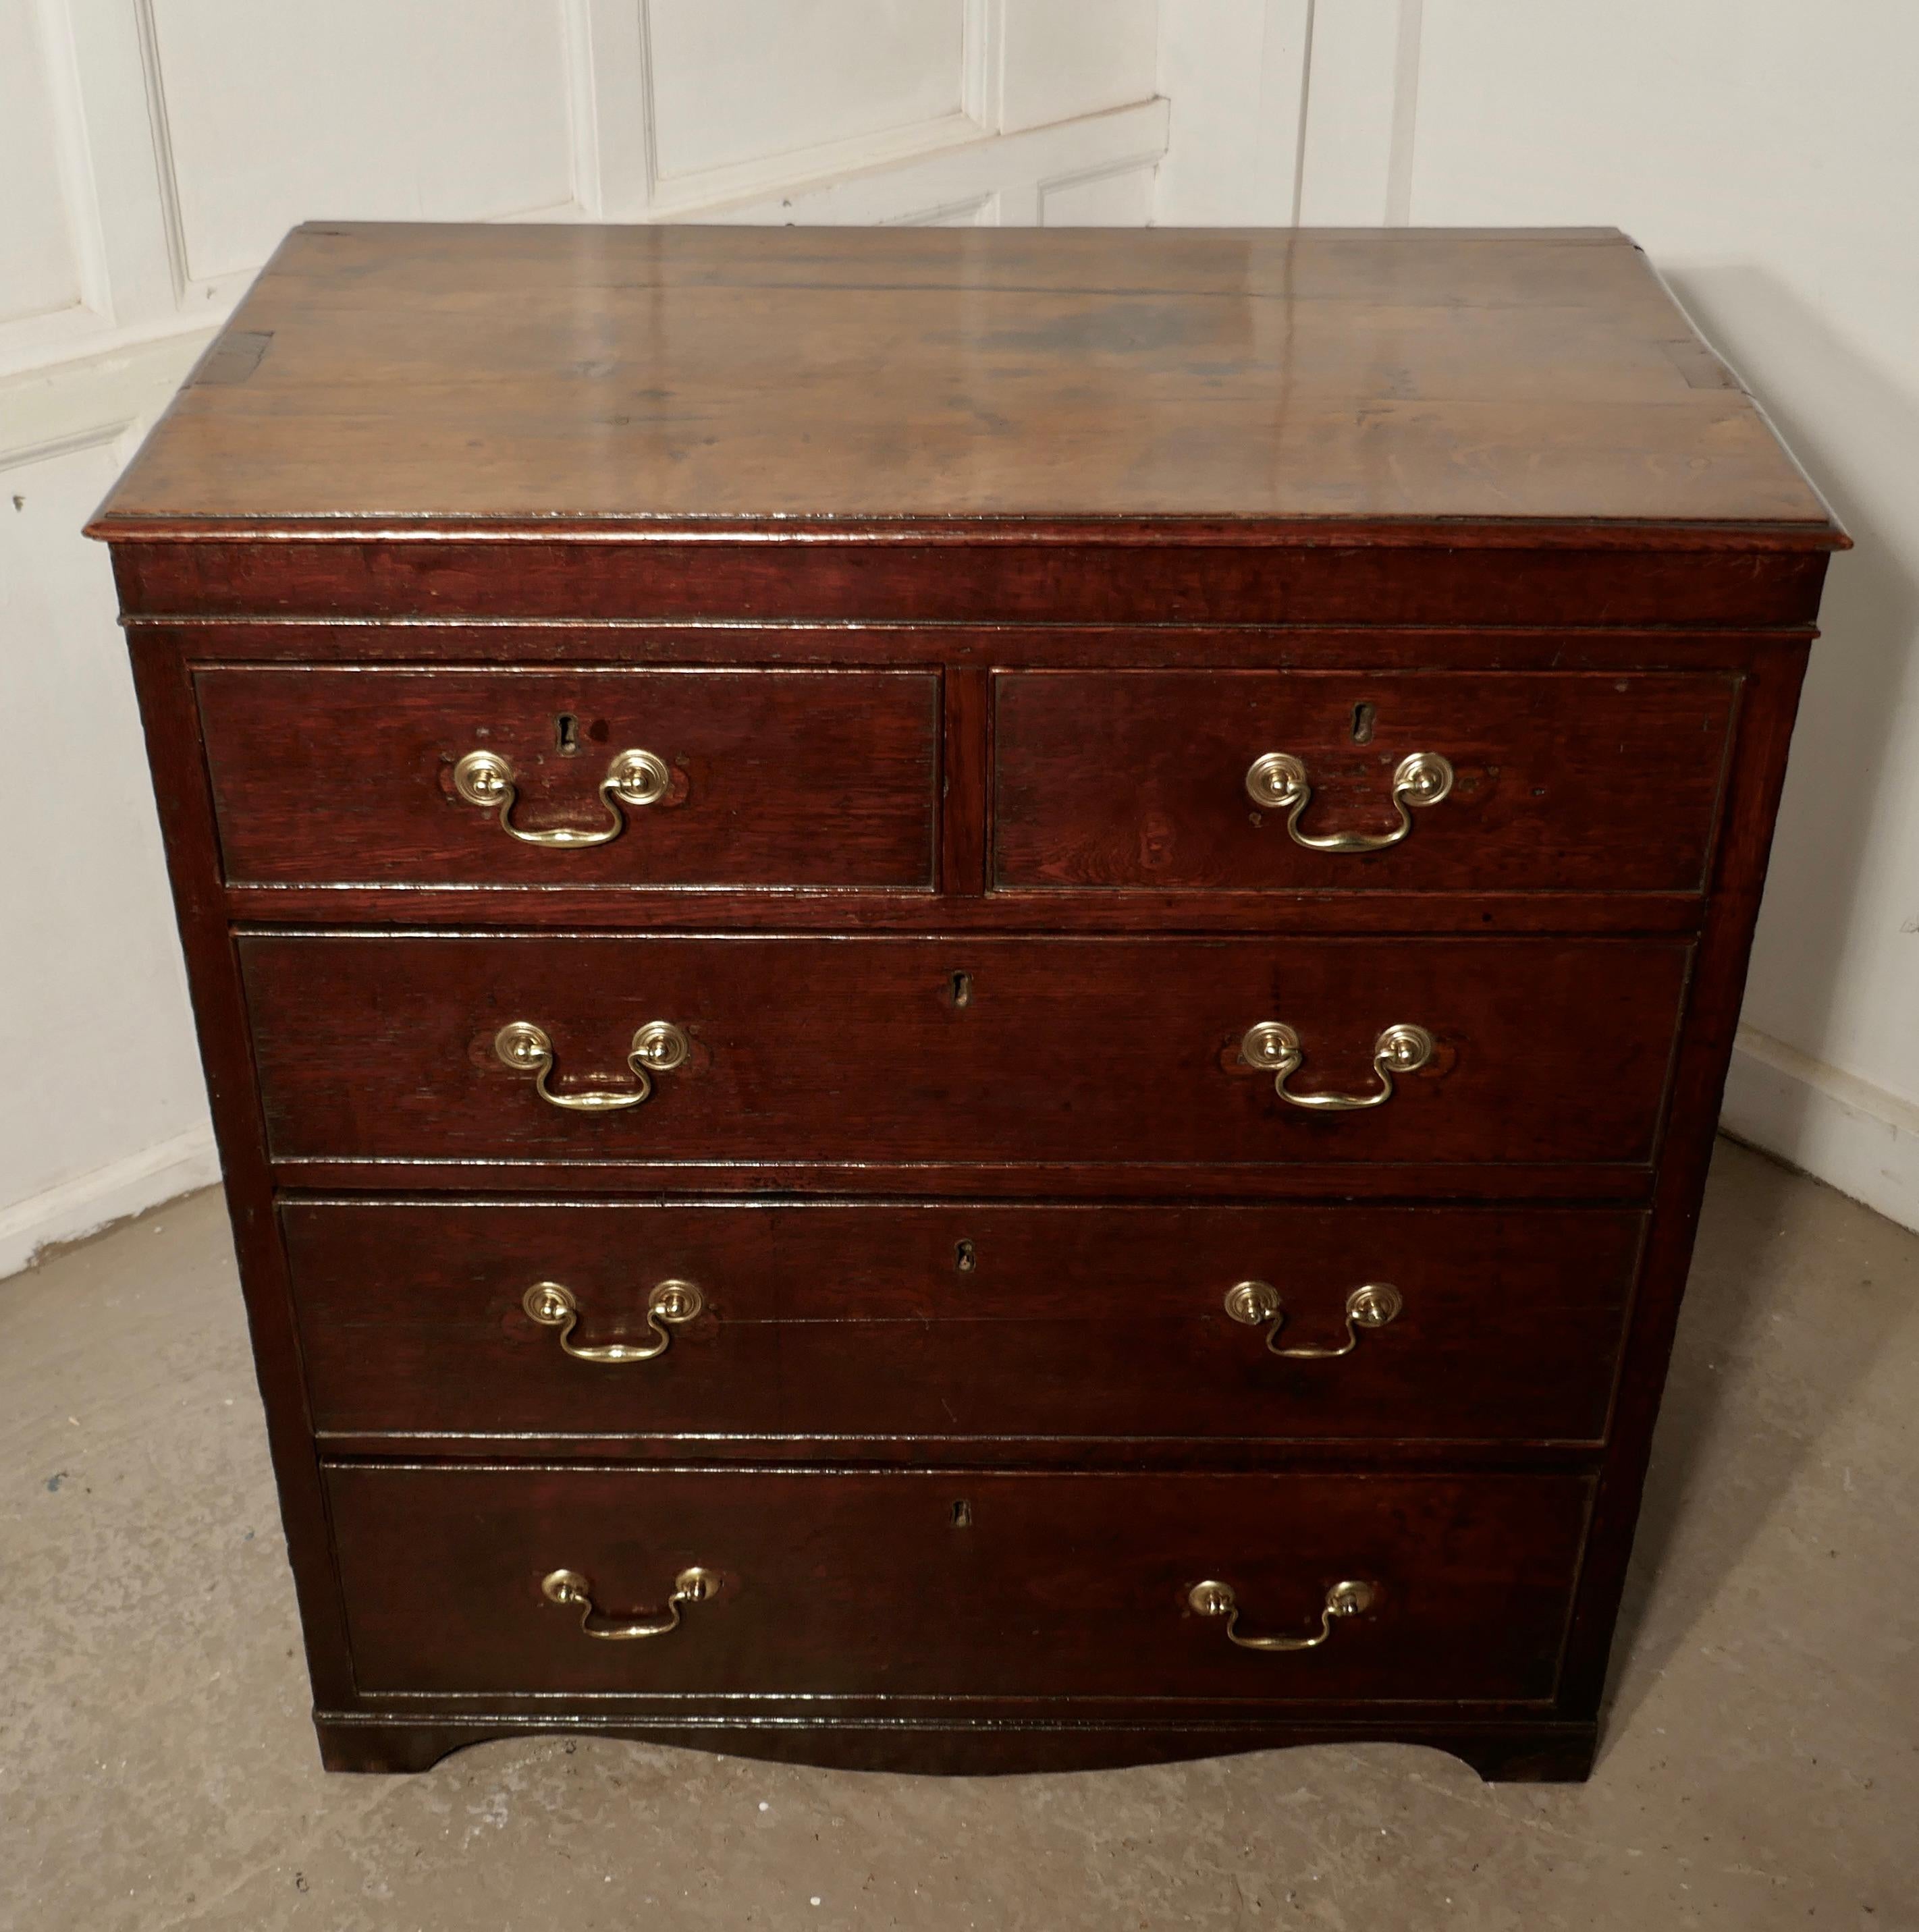 Early 19th Century Period Oak Chest of Drawers This Charming Old Oak Georgian Chest of Drawers For Sale